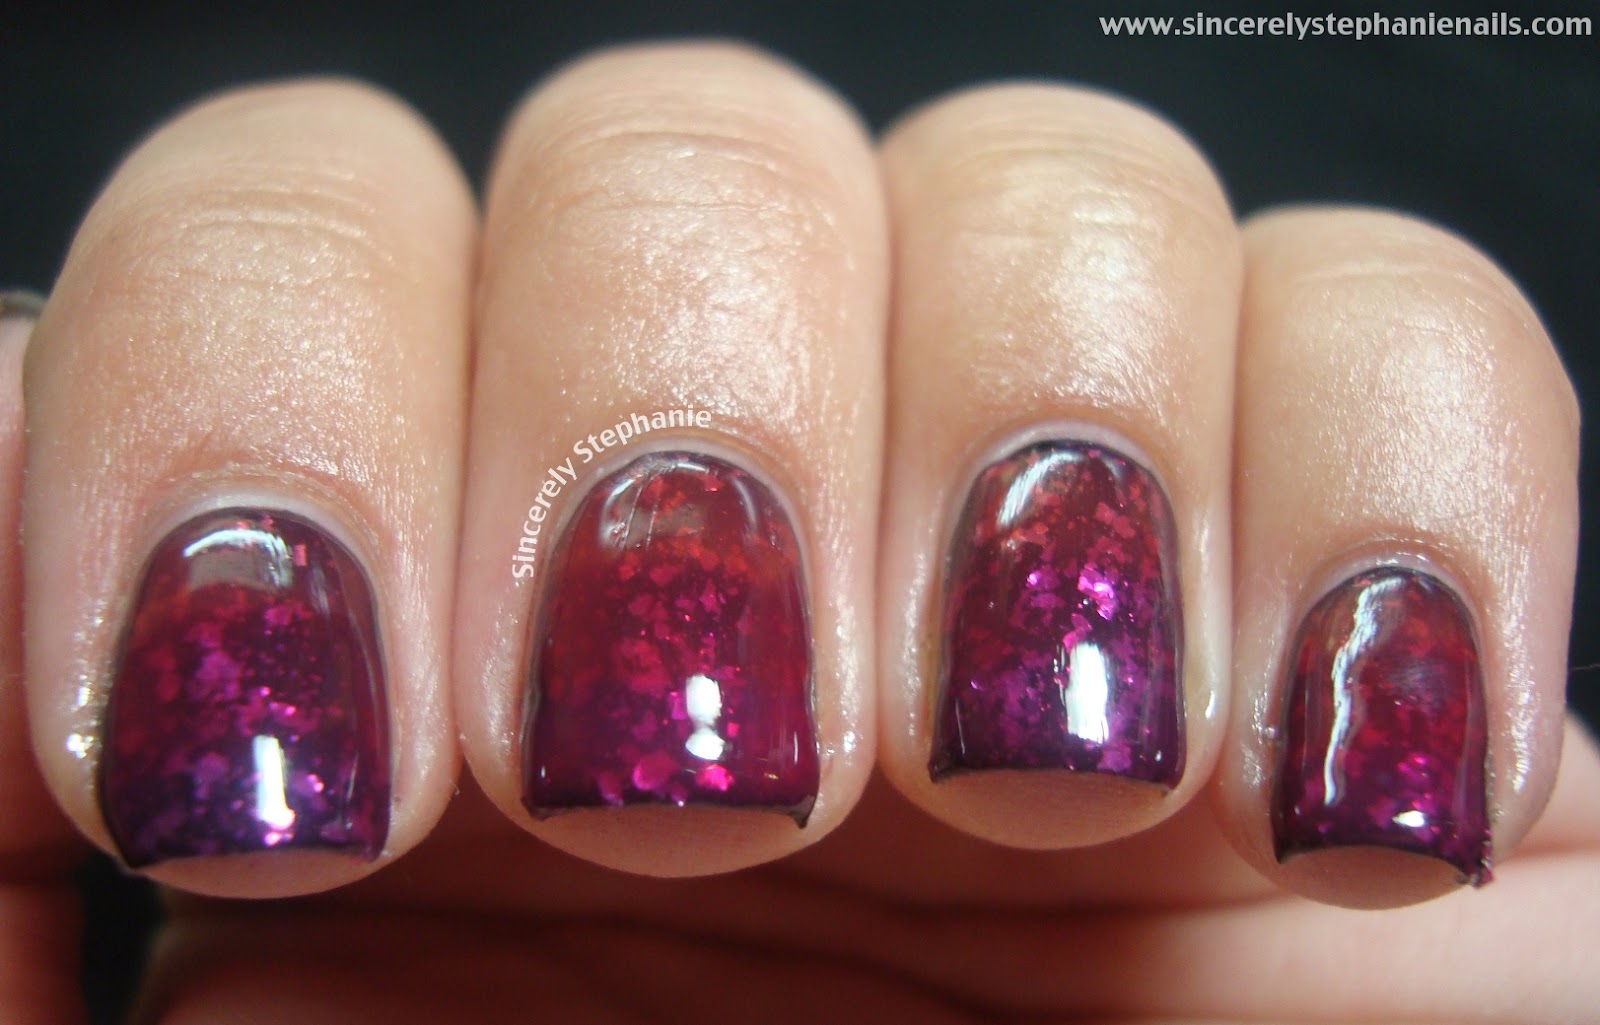 jelly sandwich gradient nail art. Isn't is preeetttyyyy :D To get this look